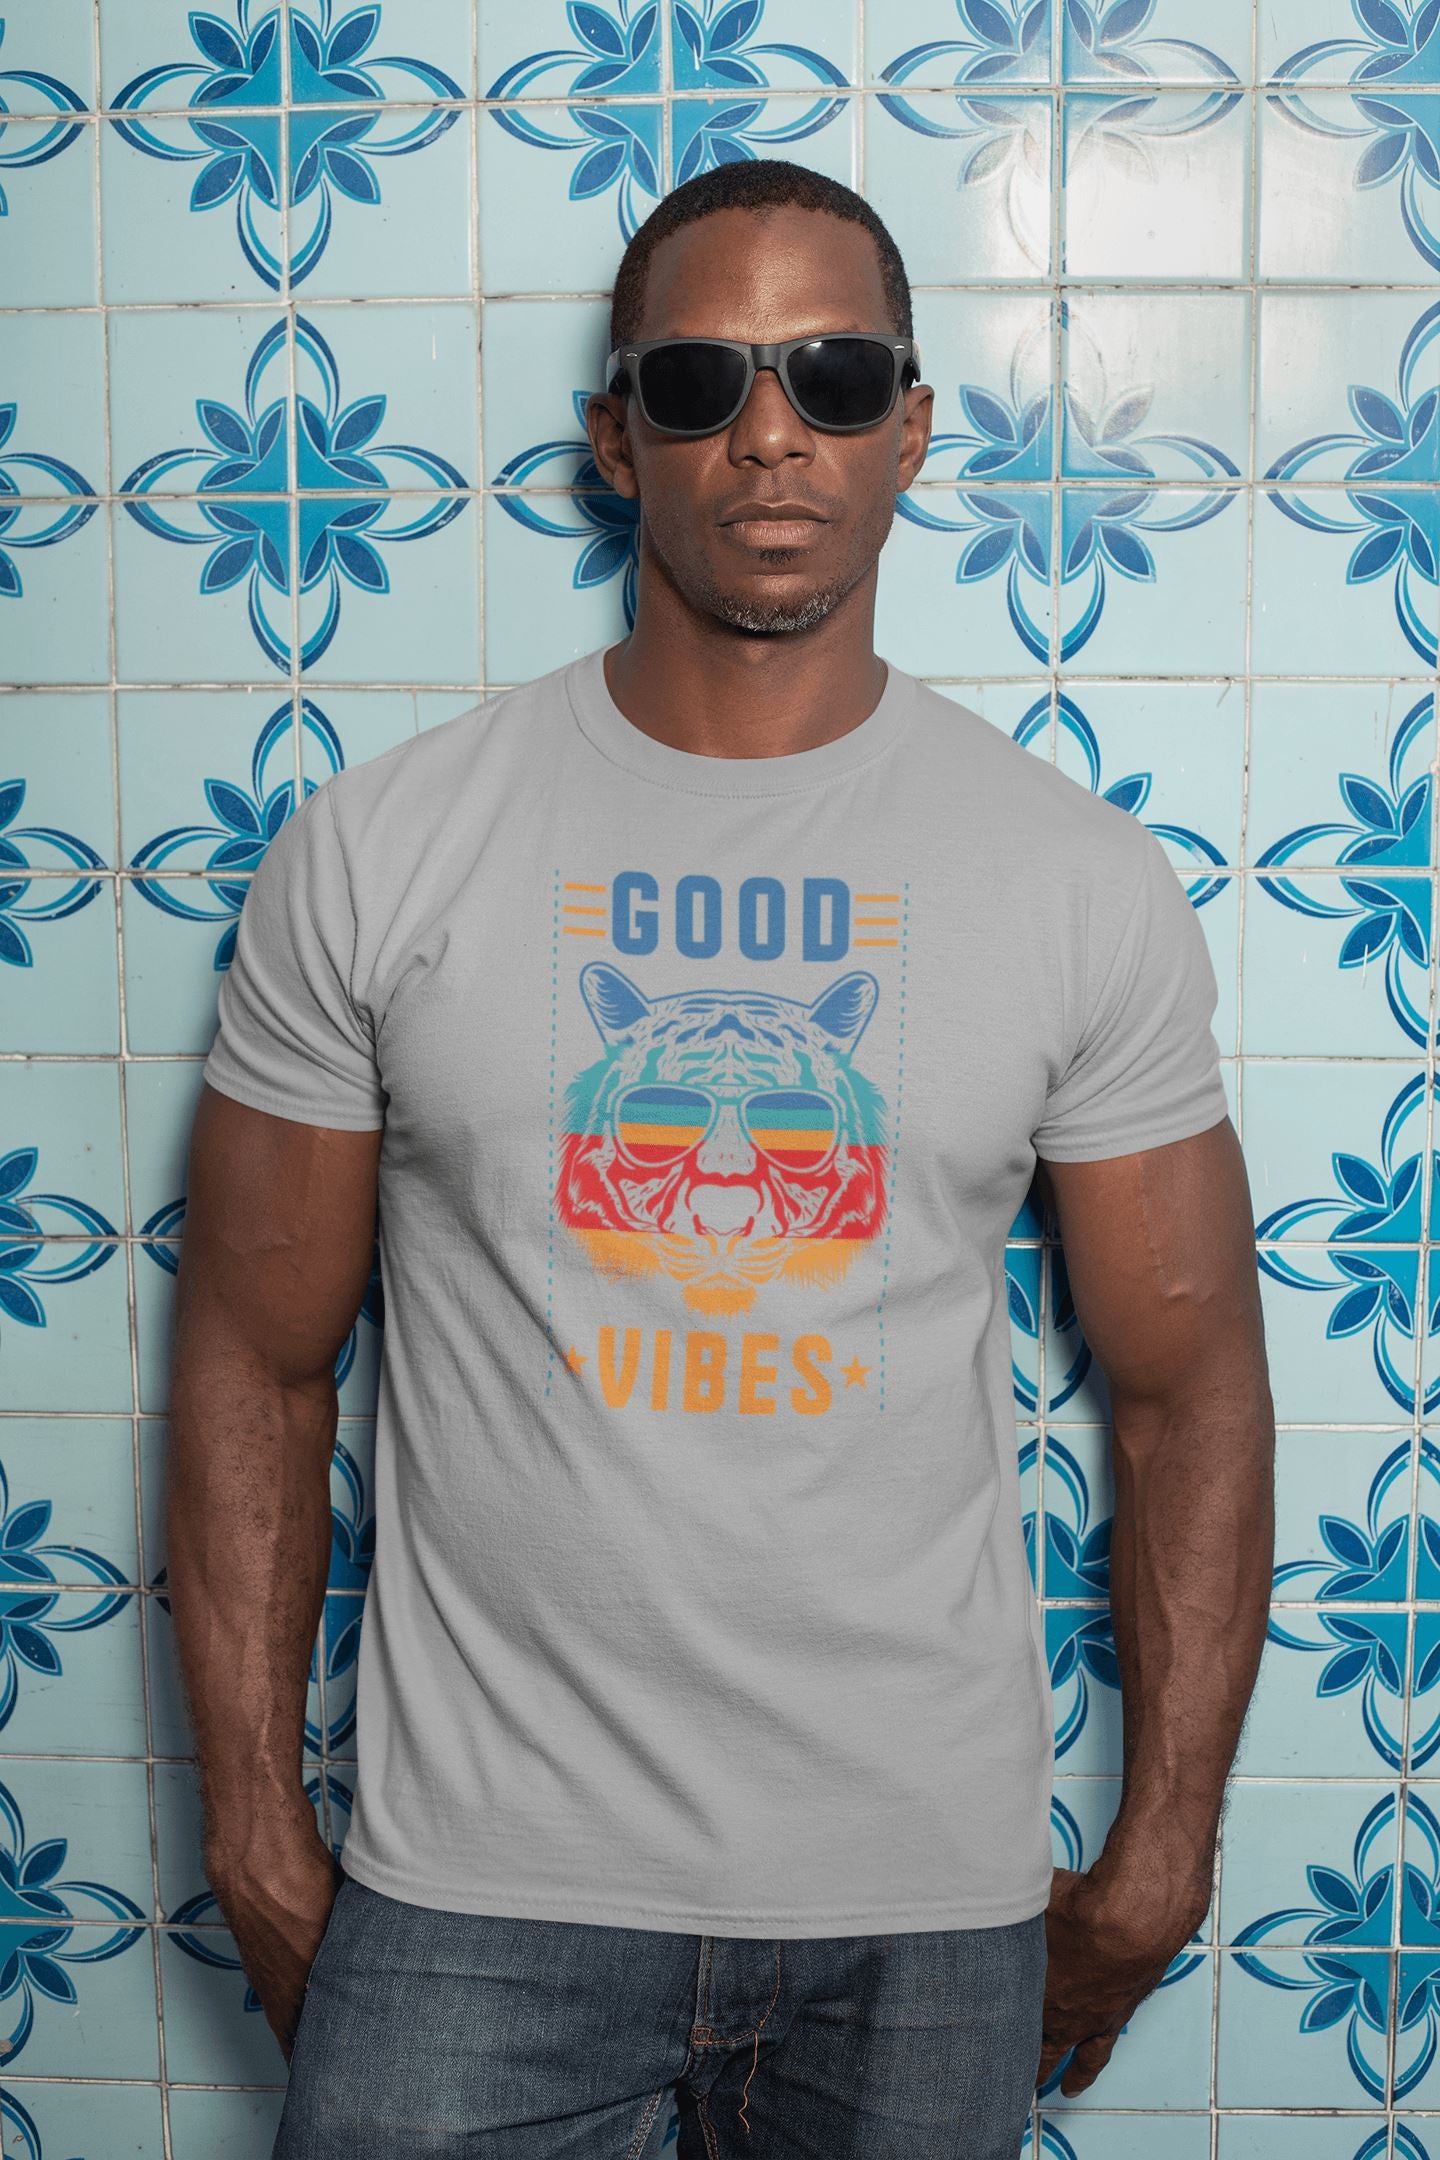 Good Vibes Cool Tiger Exclusive Supreme T Shirt for Men and Women - Catch My Drift India  activewear, beachwear, black, clothing, female, gym, made in india, shirt, t shirt, trending, tshirt,